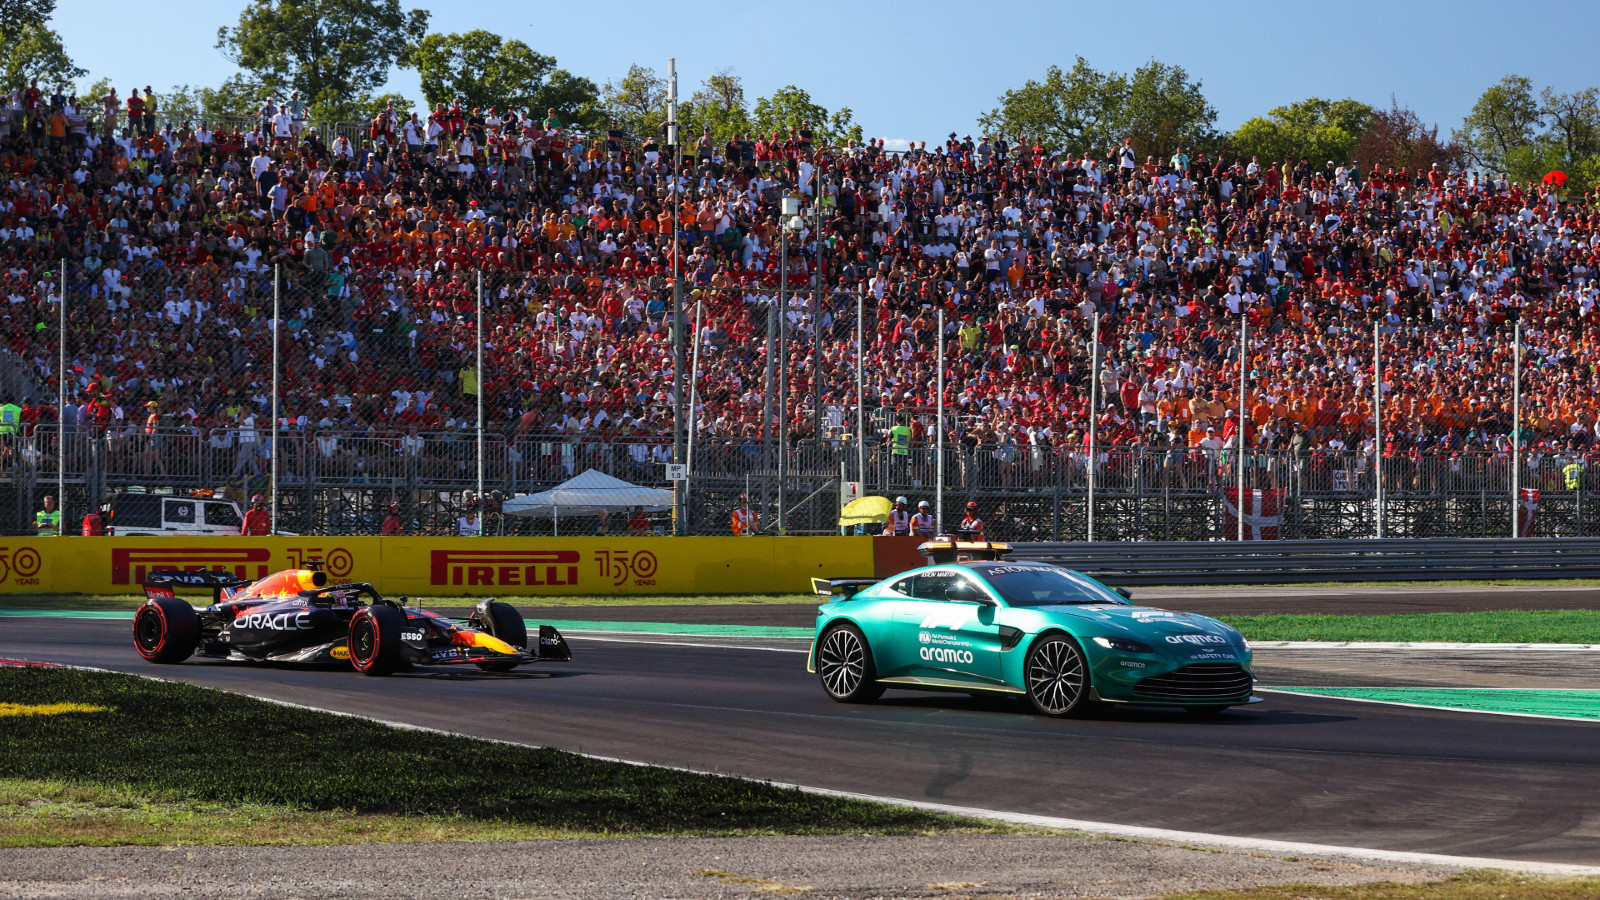 The Safety Car leads the pack at the Italian Grand Prix. Monza, September 2022.